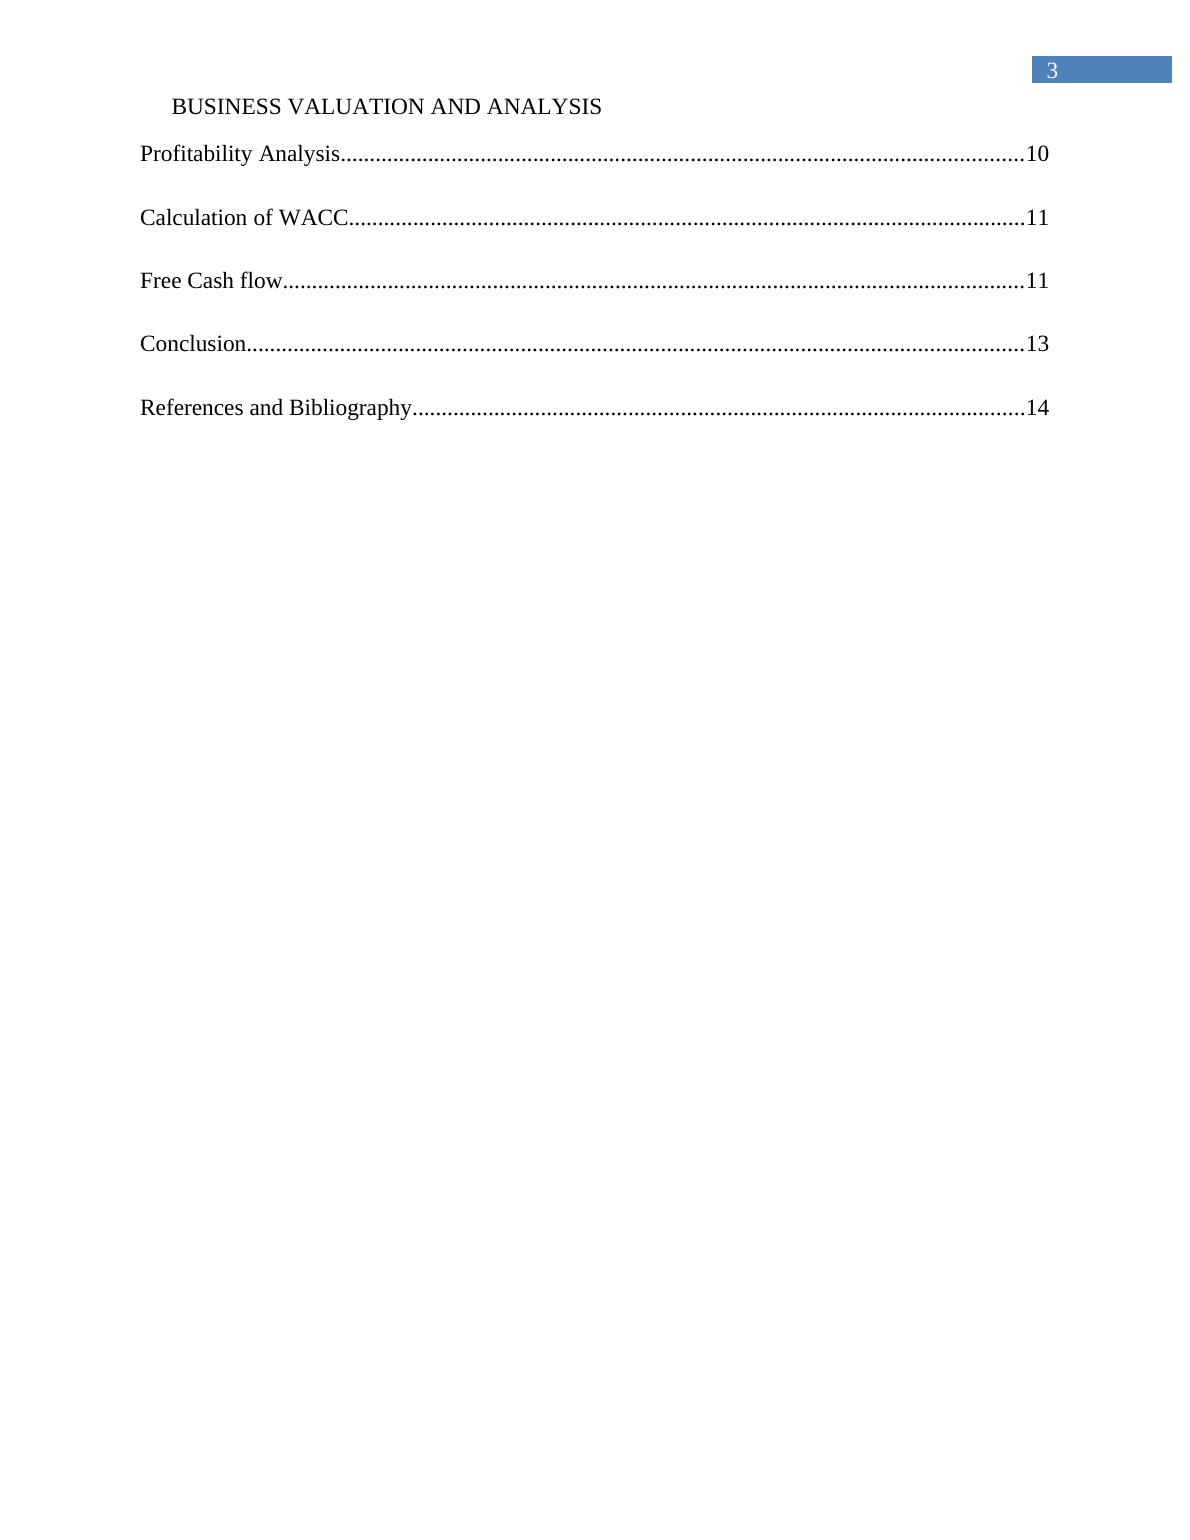 Business Valuation and Analysis PDF_3